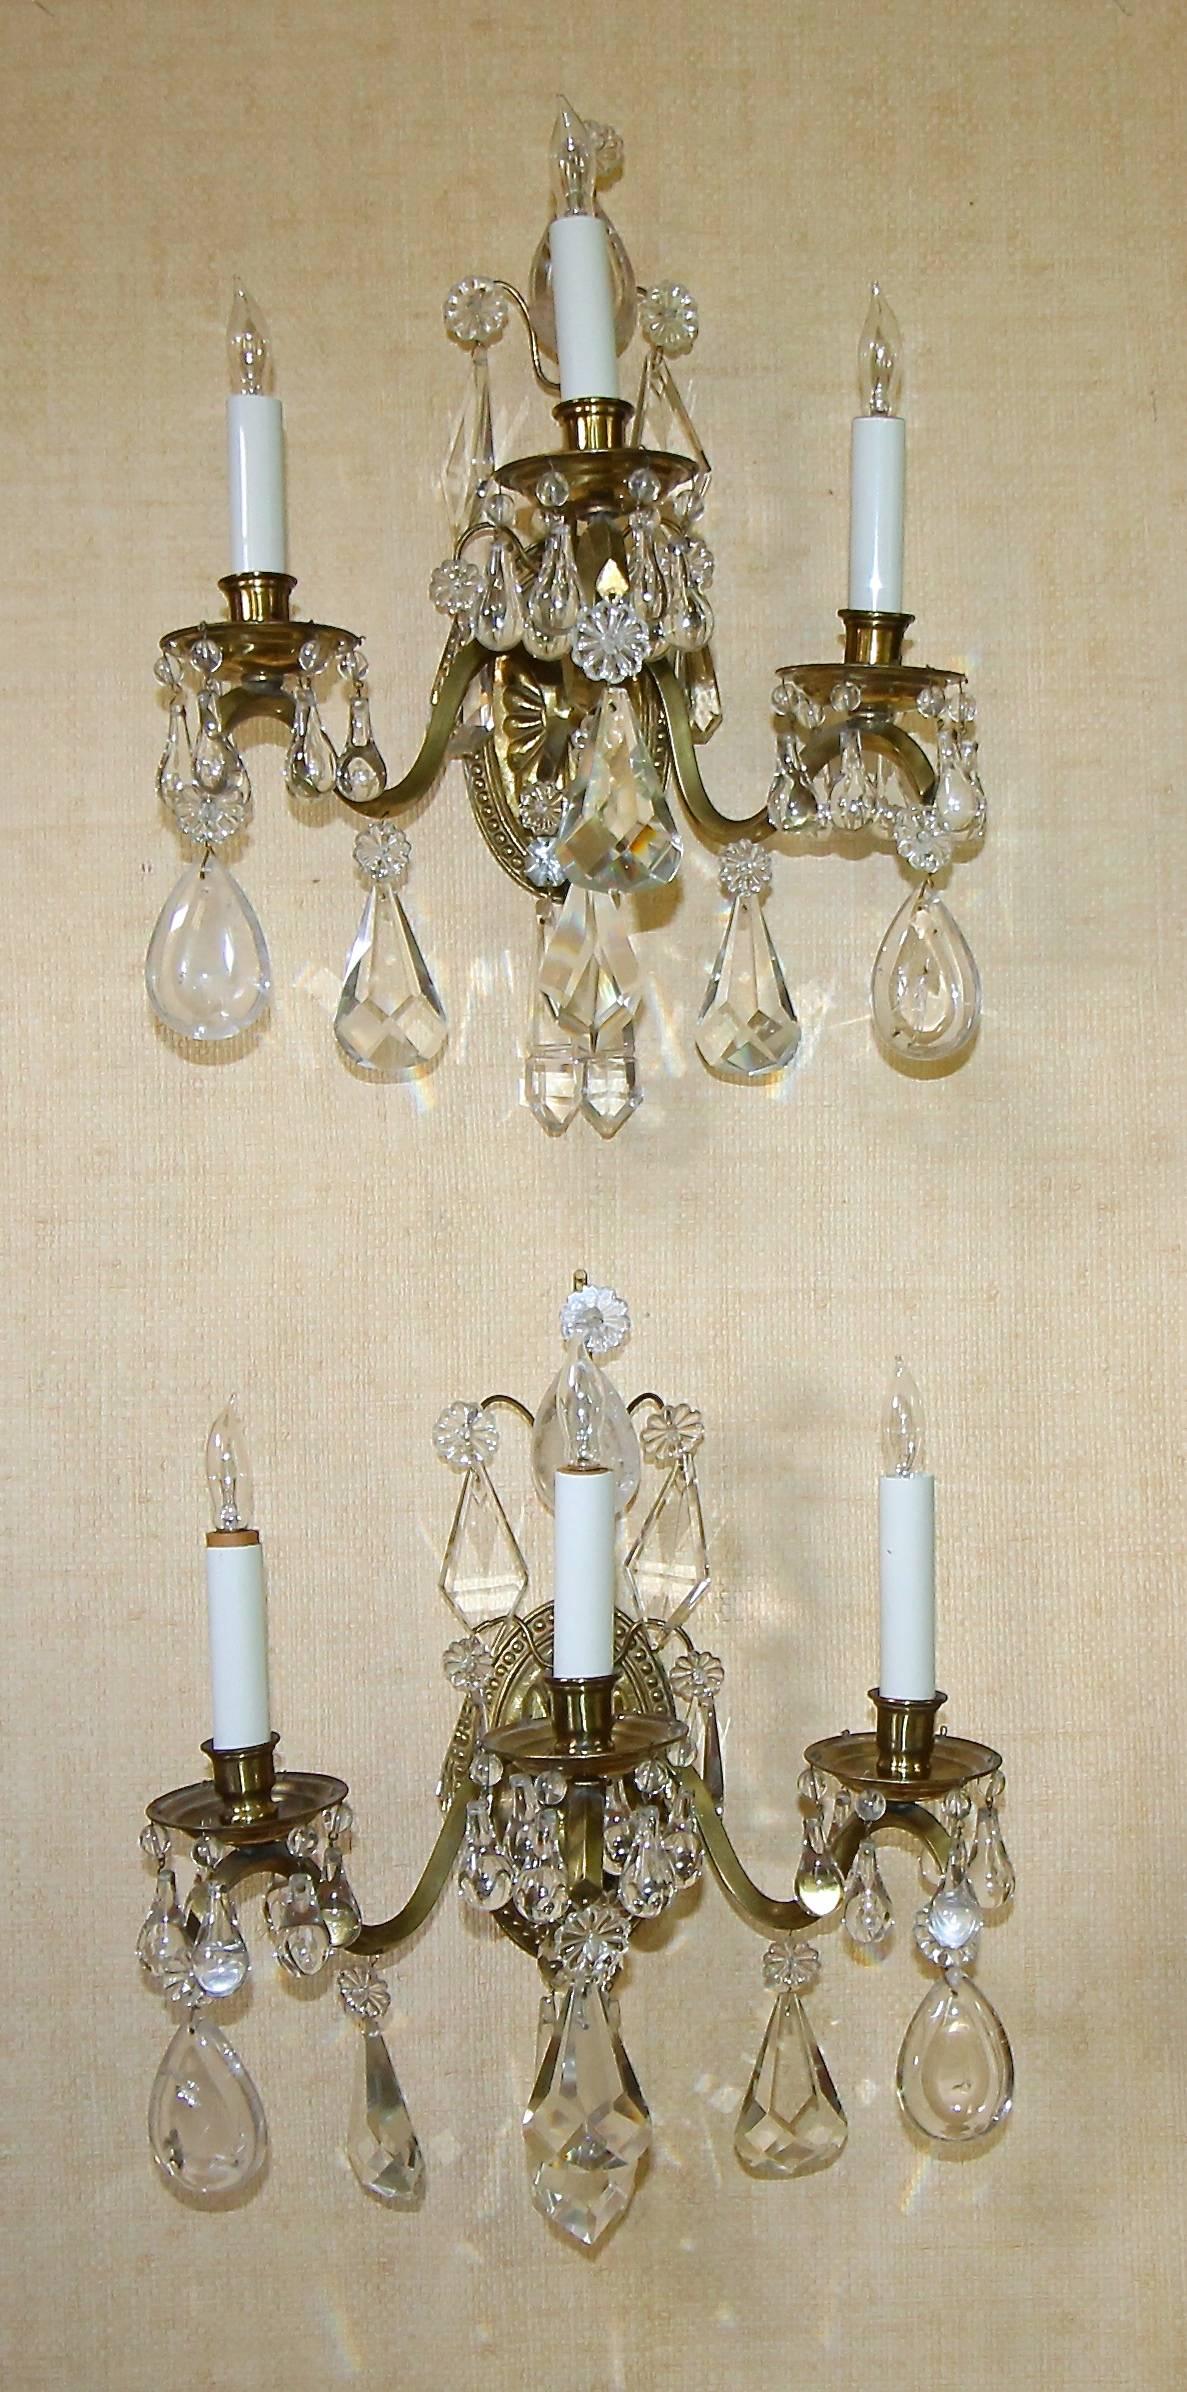 Pair of 1920s French three-arm light brass wall sconces with combination finely cut crystal and rock crystal prisms.